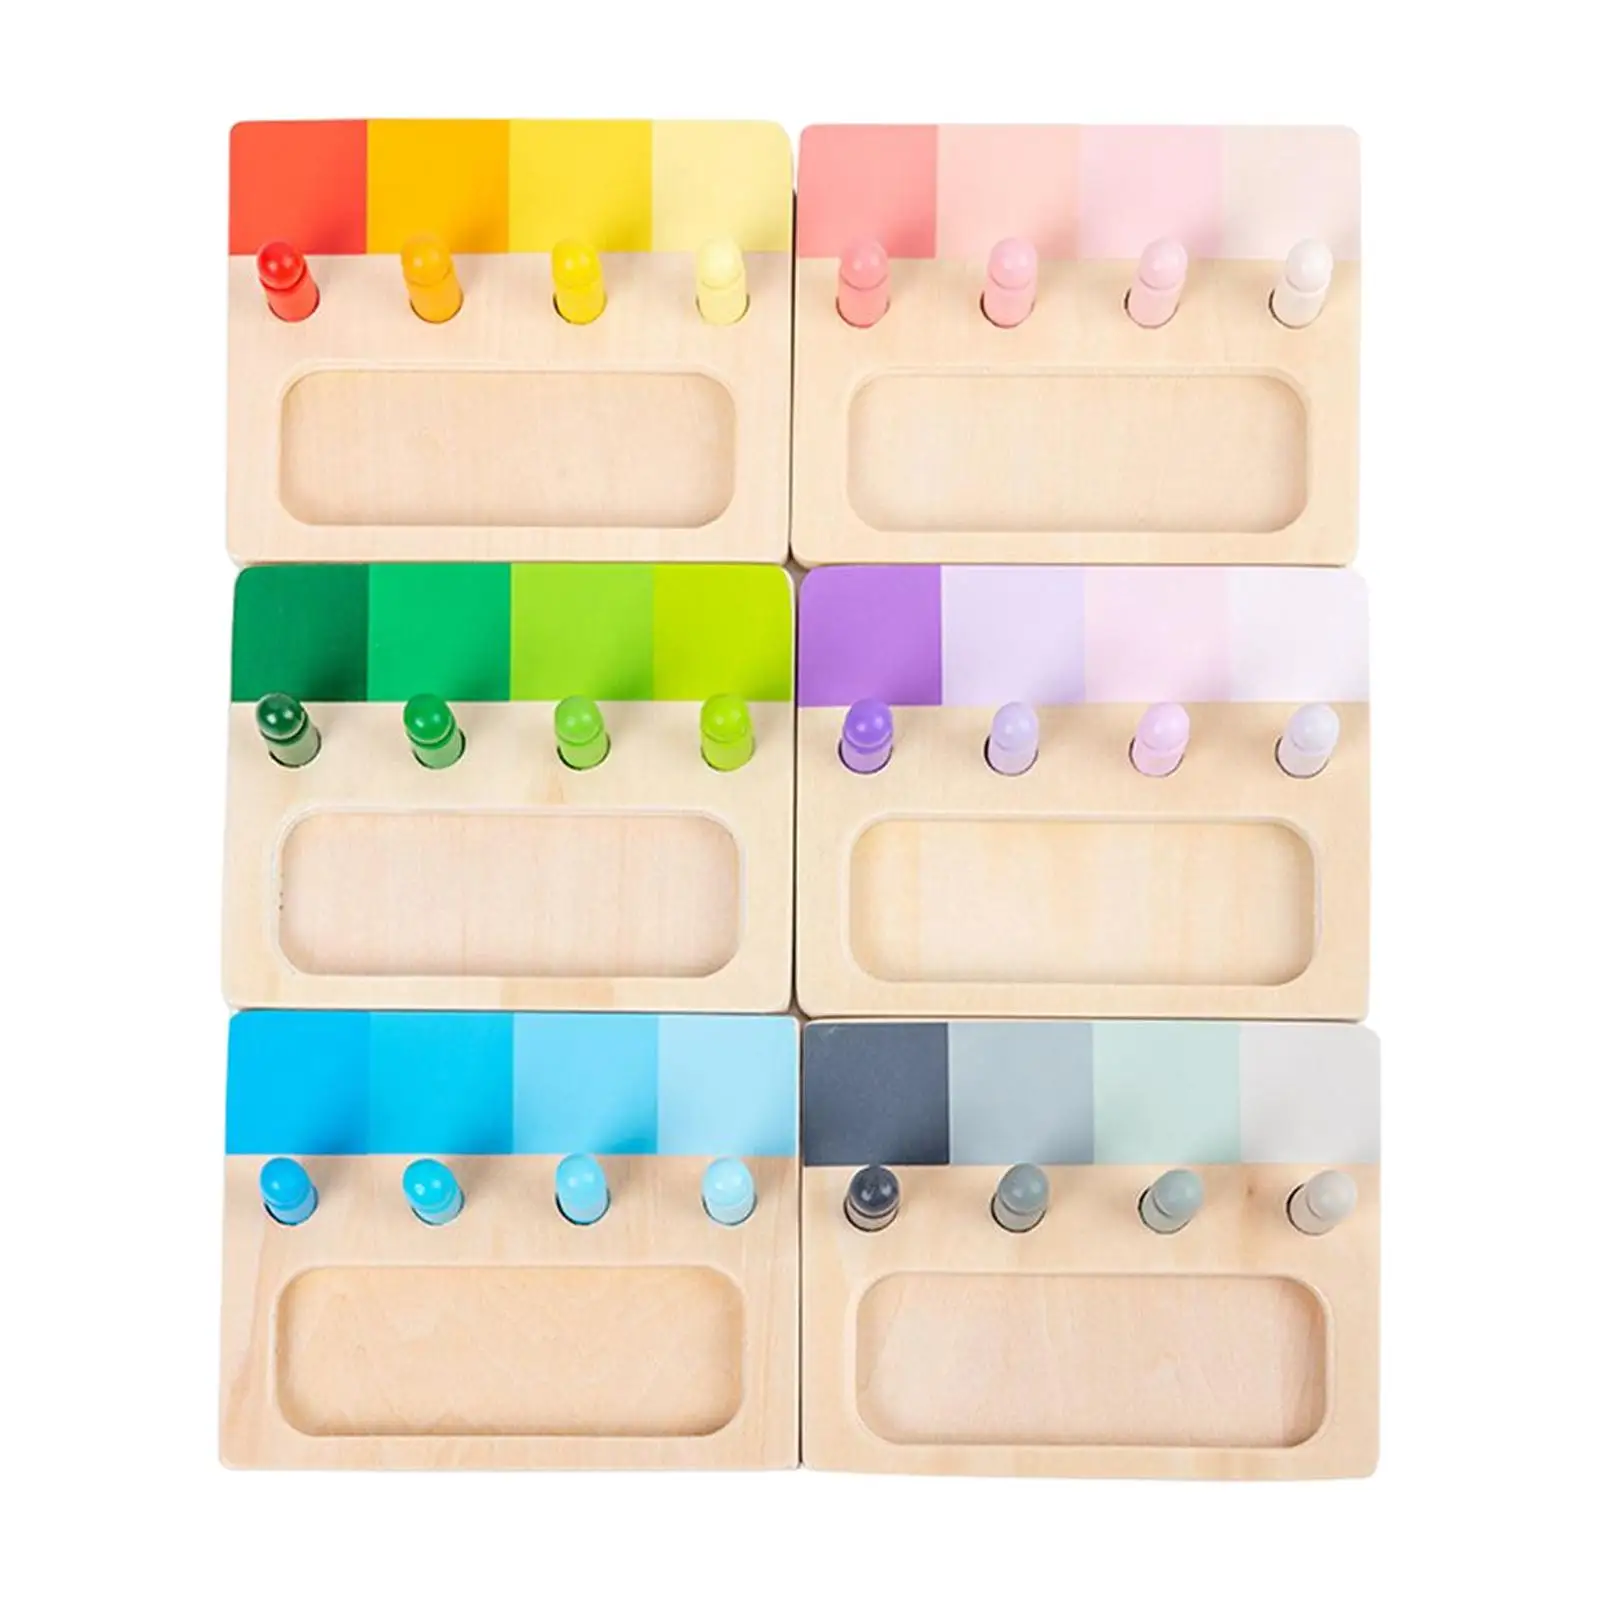 6x Montessori Color Matching Toy with Chess Early Learning Toys Color Resemblance Sorting Task for Teaching Learning Interaction